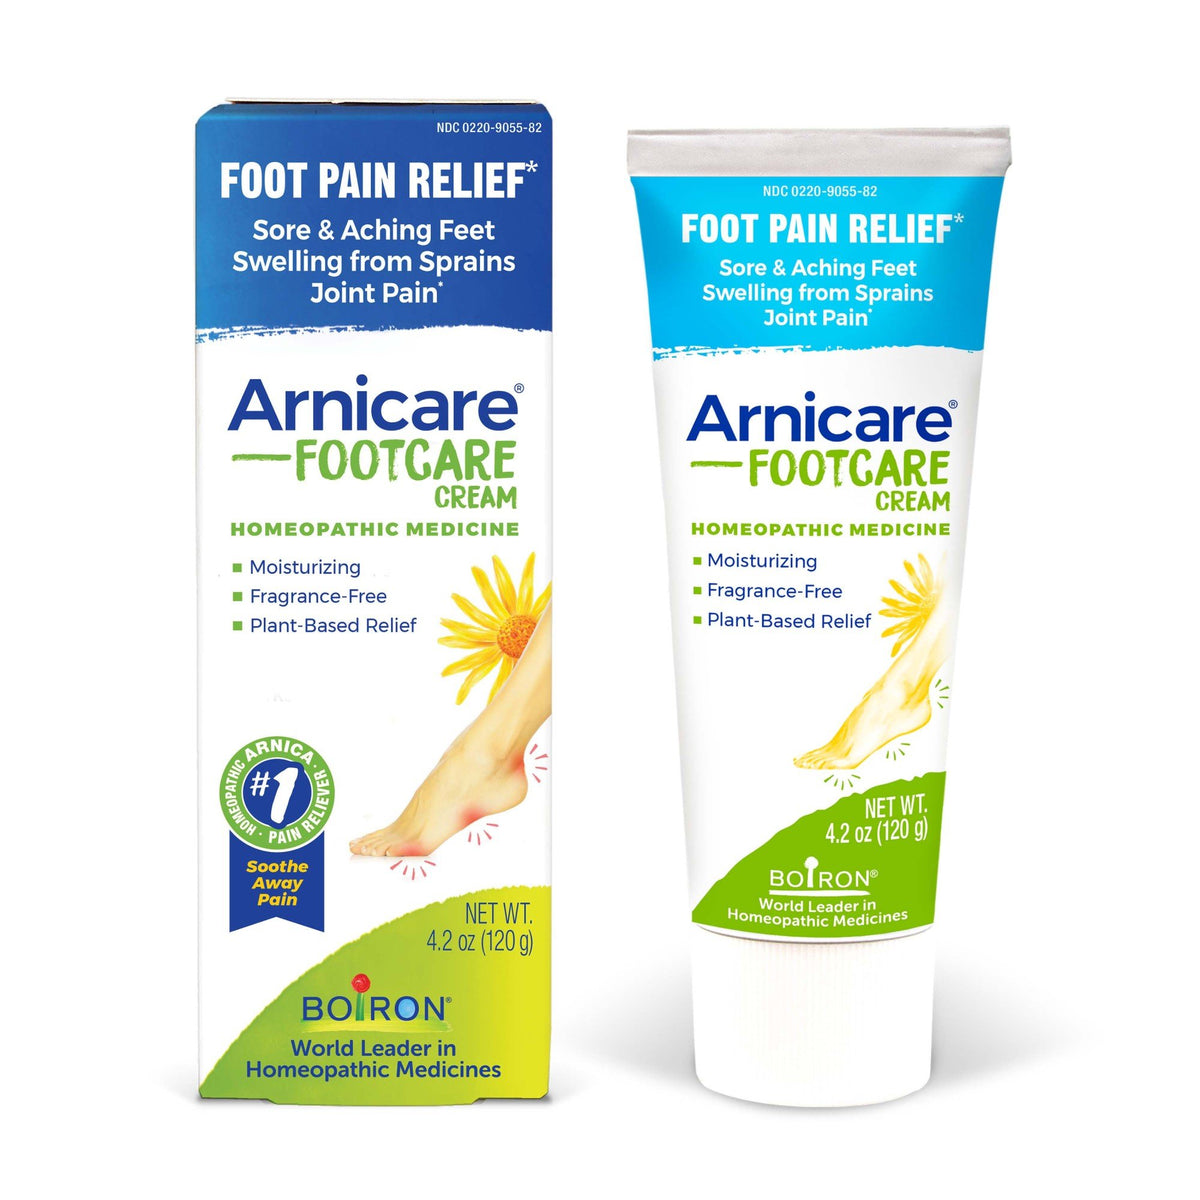 Boiron Arnicare FootCare Homeopathic Medicine For Foot Pain Relief 4.2 oz Cream